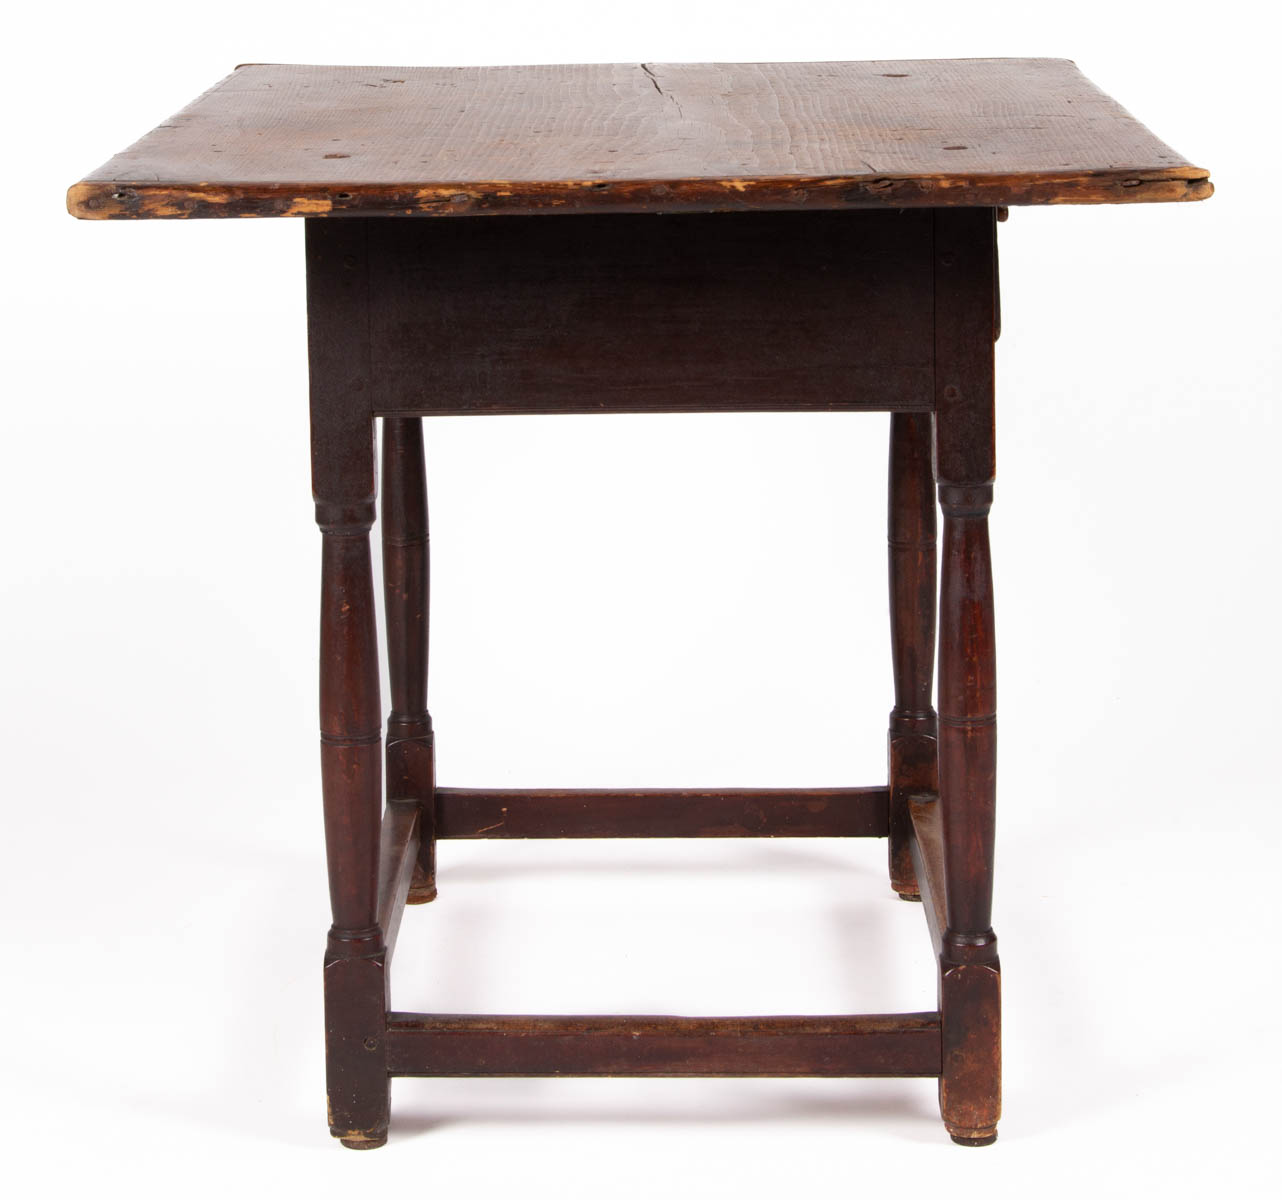 NEW ENGLAND PAINTED PINE TAVERN / WORK TABLE